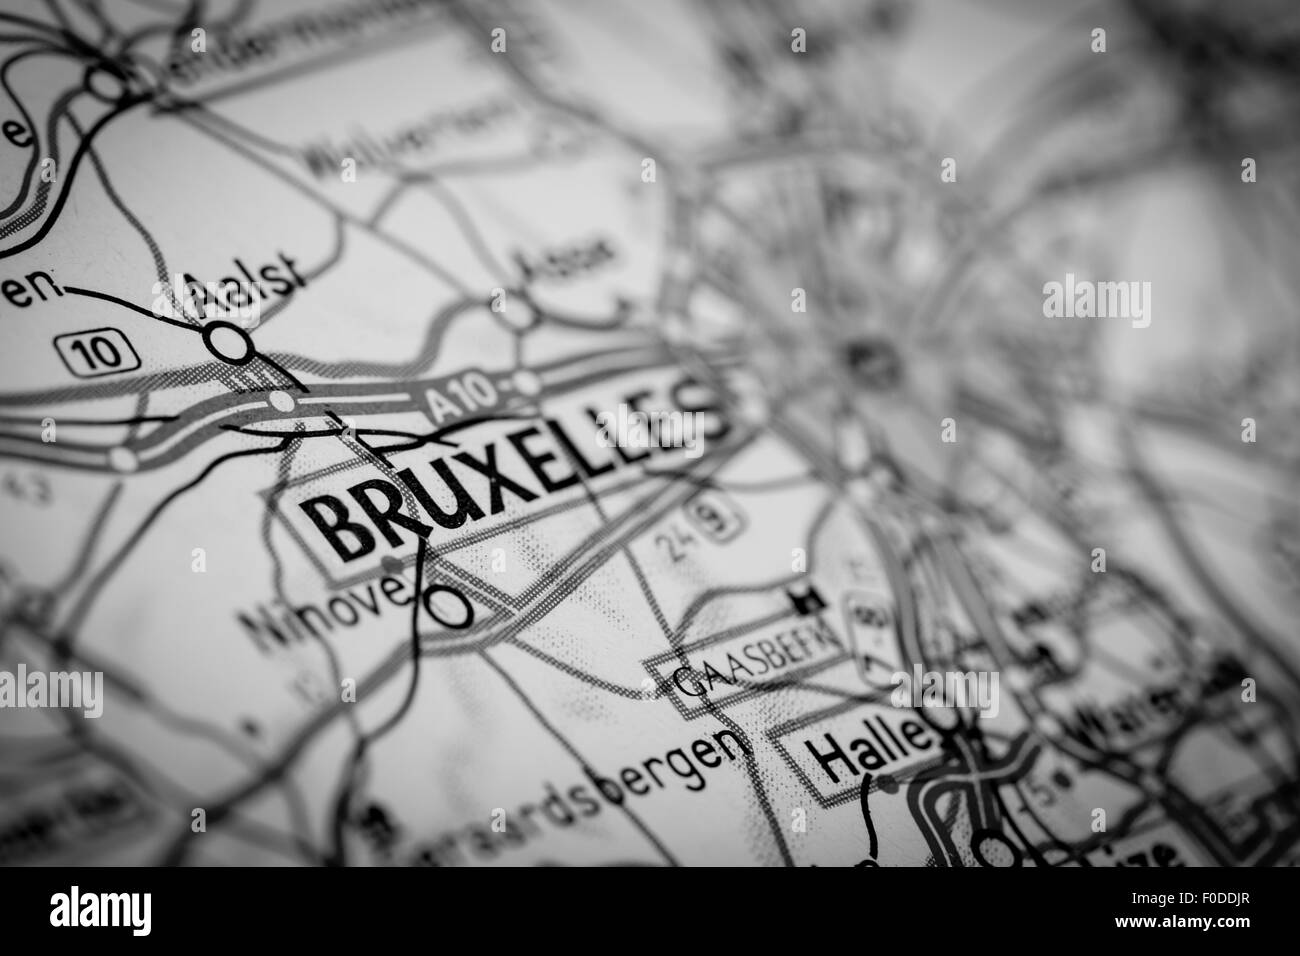 Map Photography: Bruxelles City on a Road Map Stock Photo